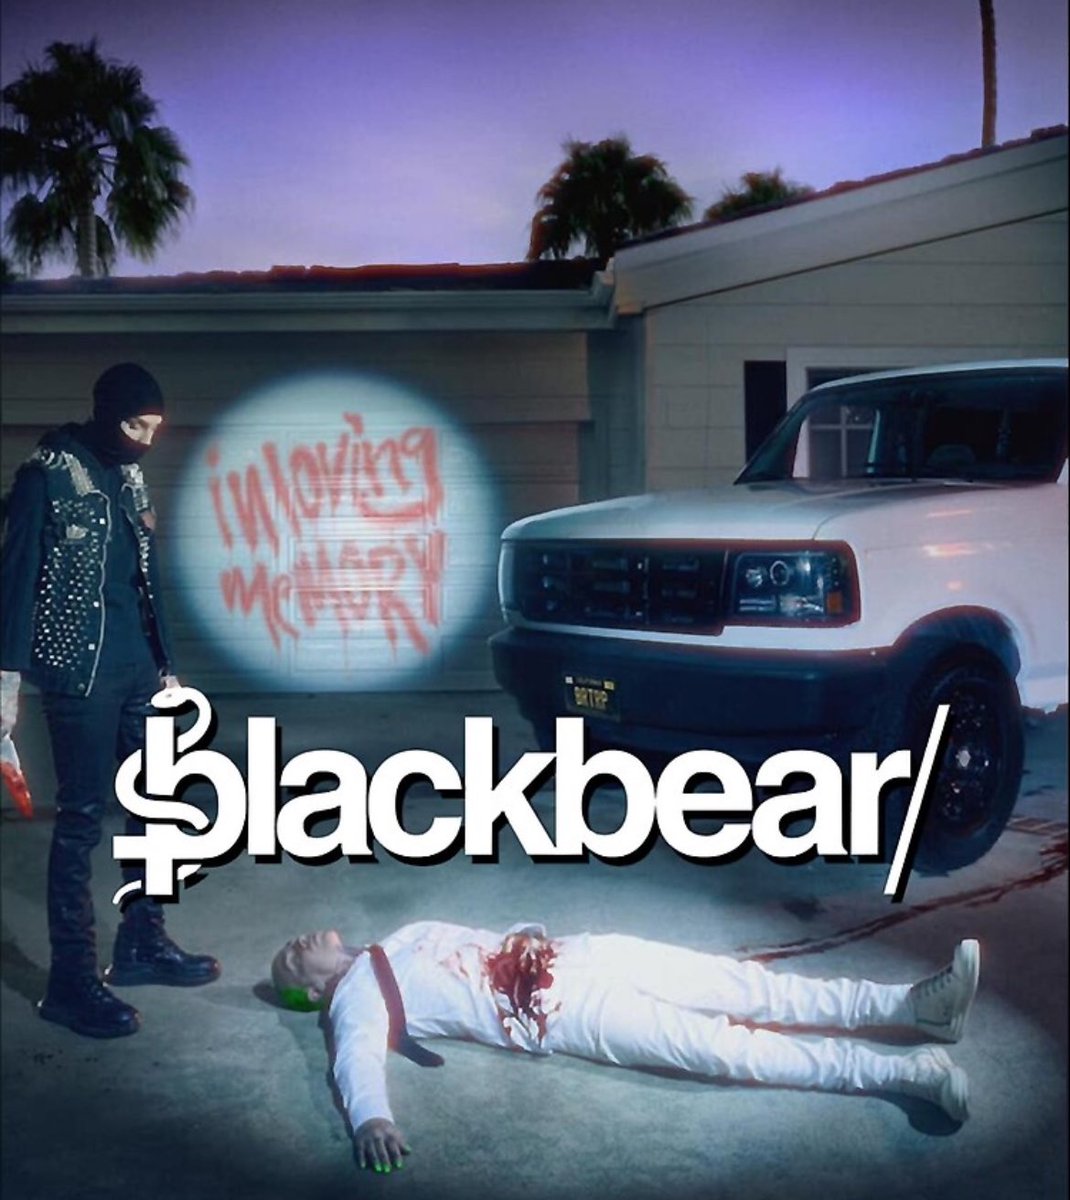 'fuilu' & 'nothing matters' ARE THE BEST SONGS on @iamblackbear #blackbear's new album 😍😍🤩🤩 I have them on repeat 🔂 💿 He really can SING & has an ear for what sounds AMAZING 🔥 (a hottie too ‼️) #NothingMatters #punkrock #rock #music